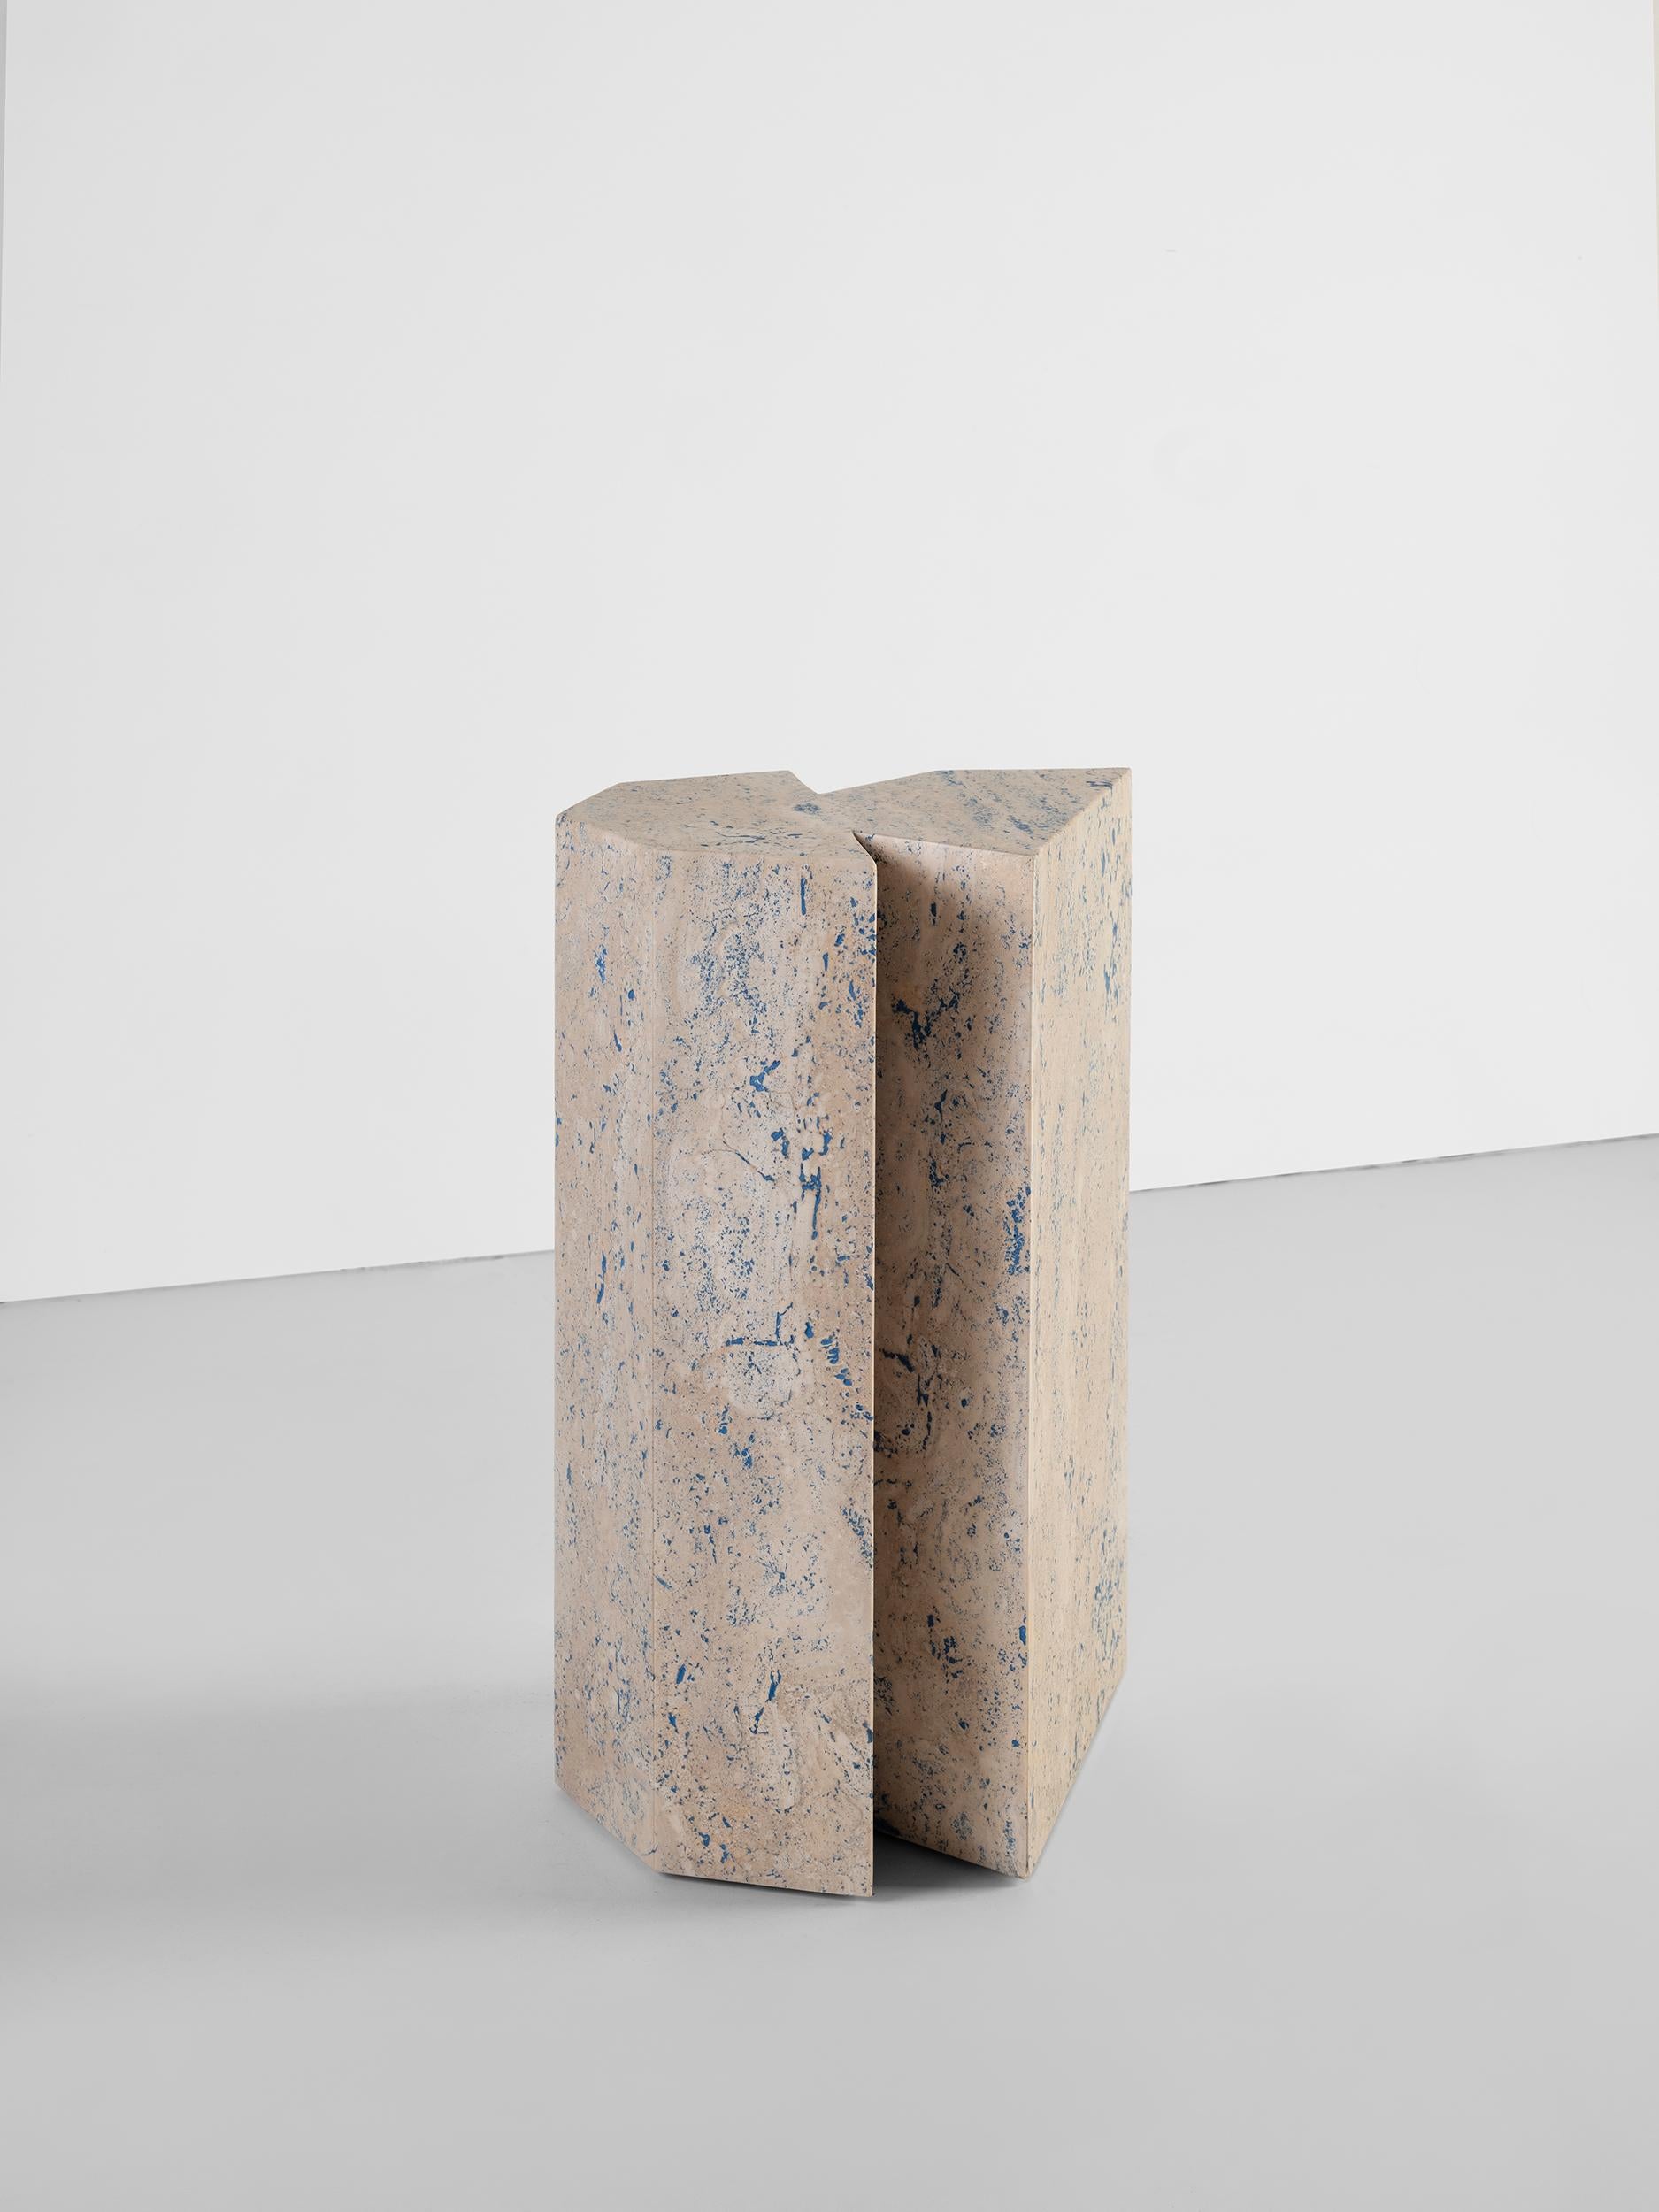 Classico Scomposto deconstructs the conceptual and concrete idea of stability of the travertine. The project investigates a different and unusual perception, far from the collective consciousness. The classic forms break down, the stone is stained